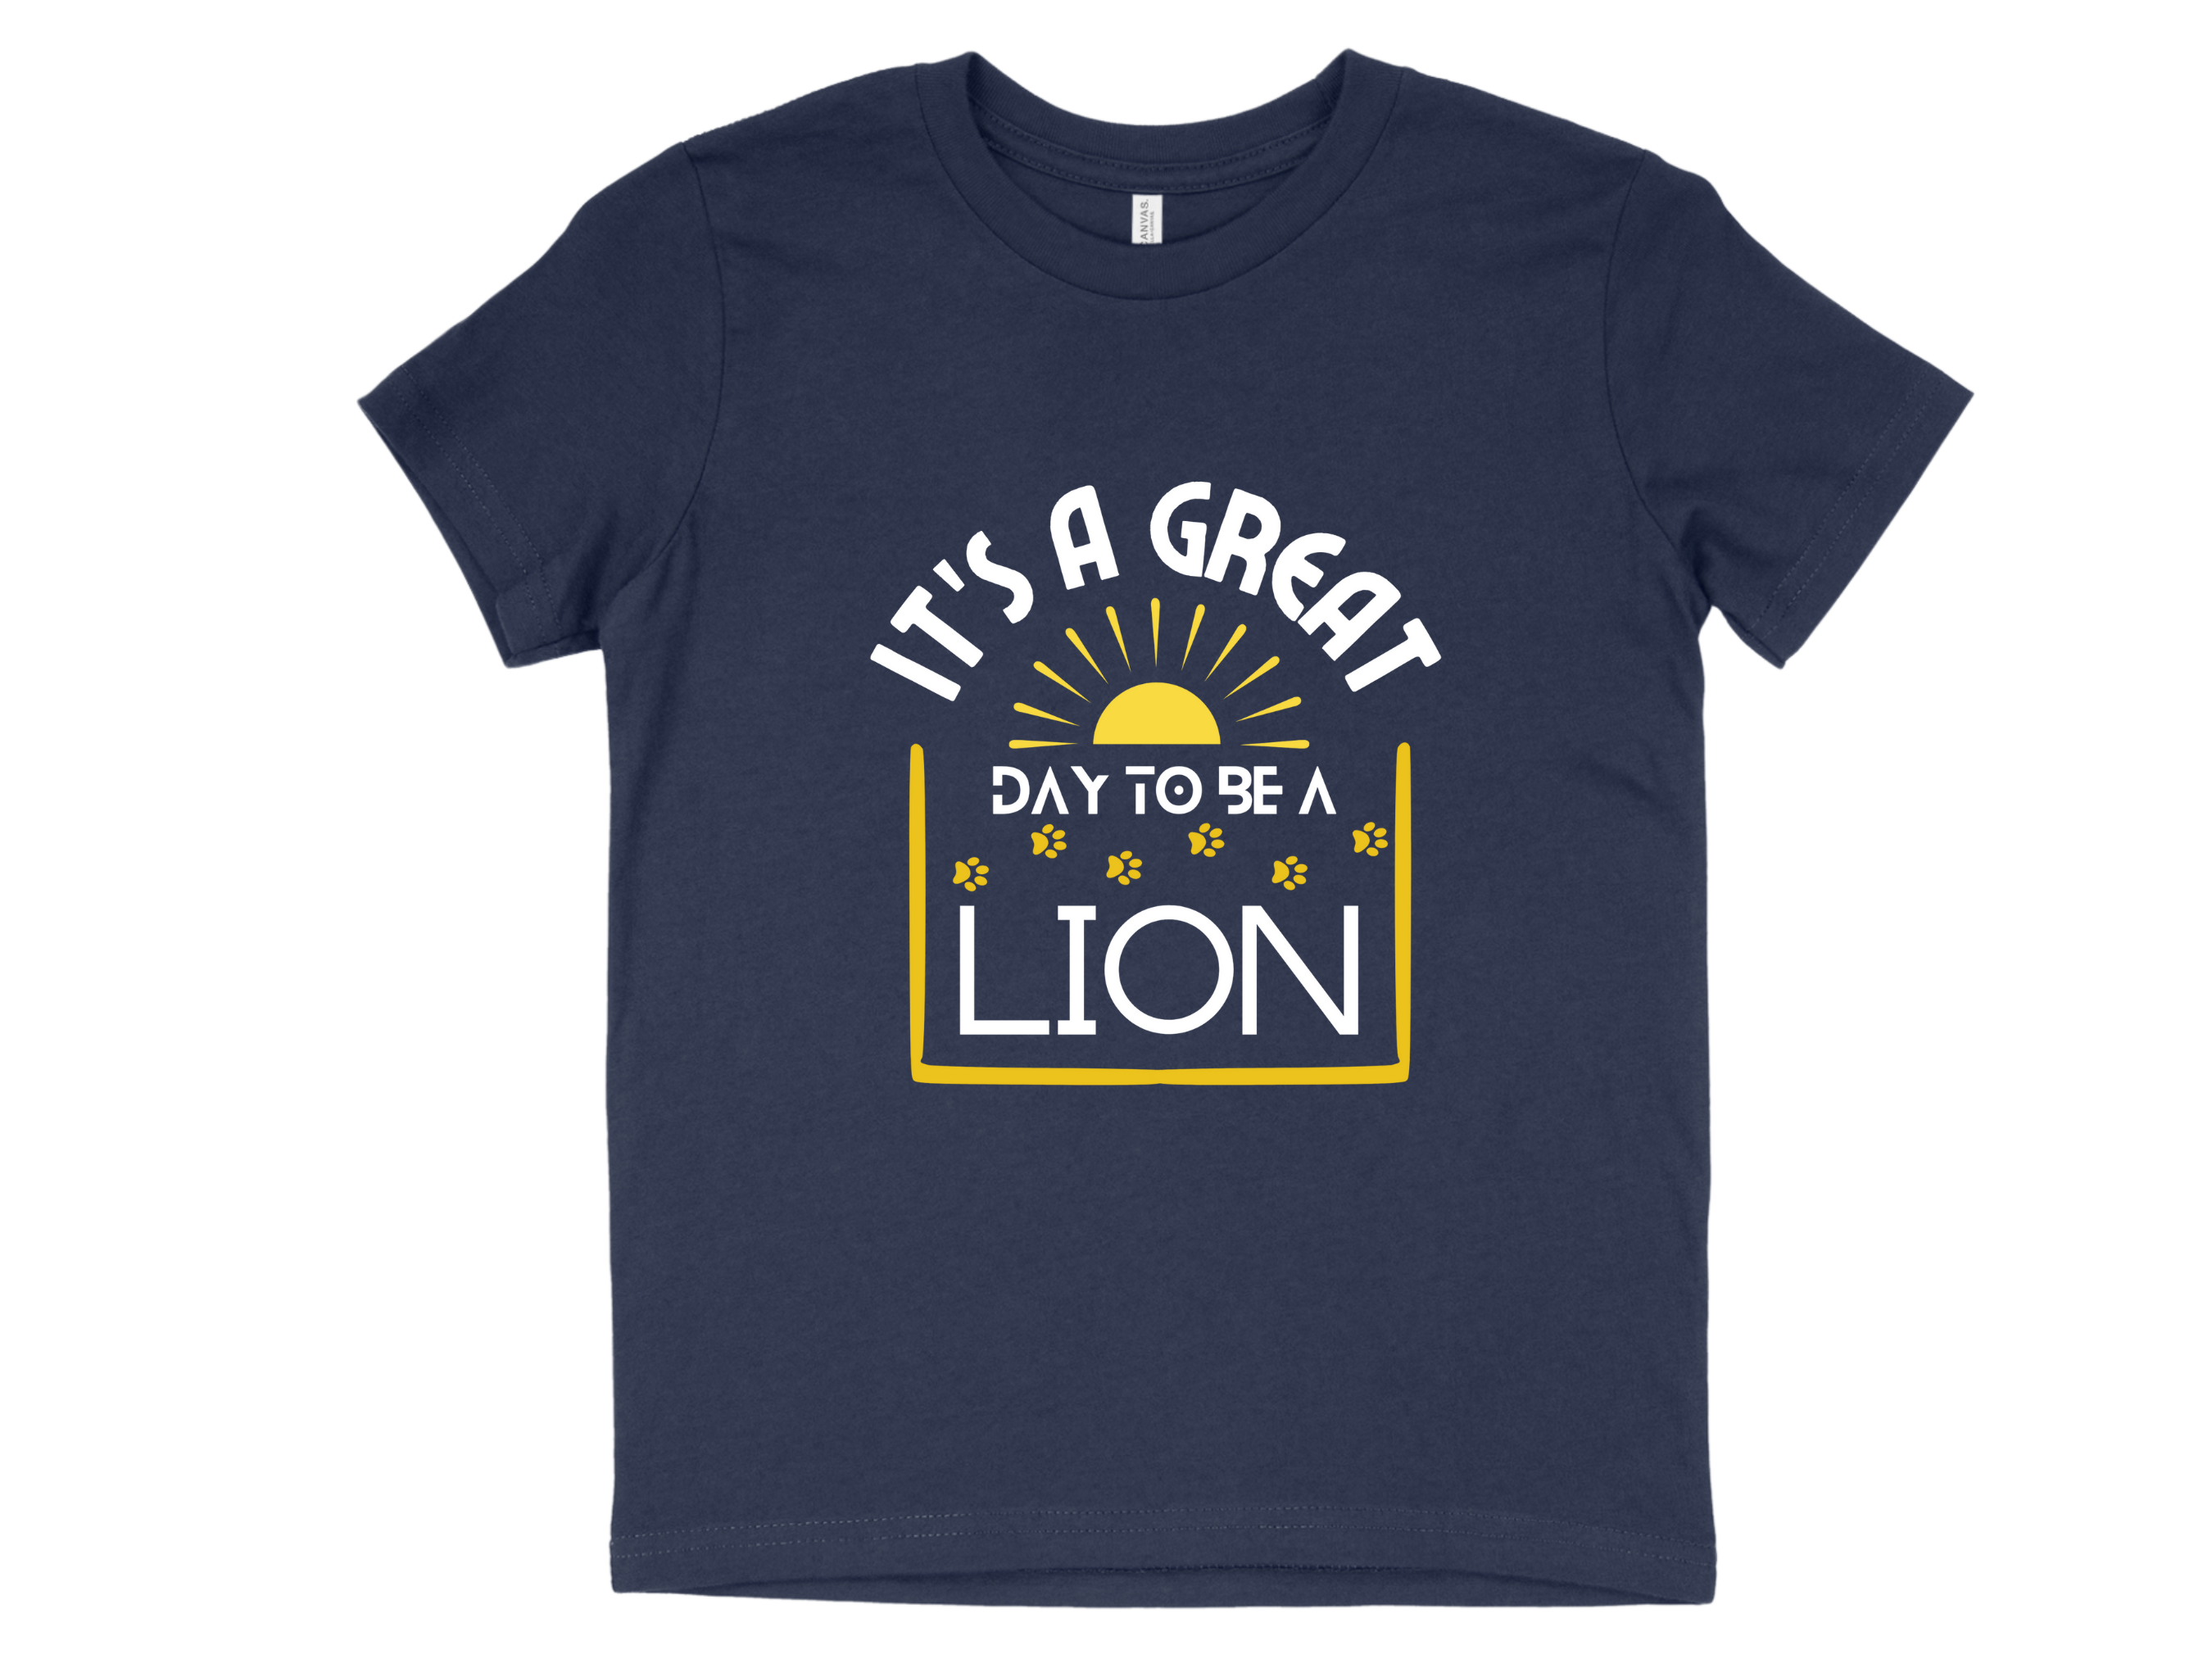 It's a great day to be a lion - Navy  Short Sleeve Large Image